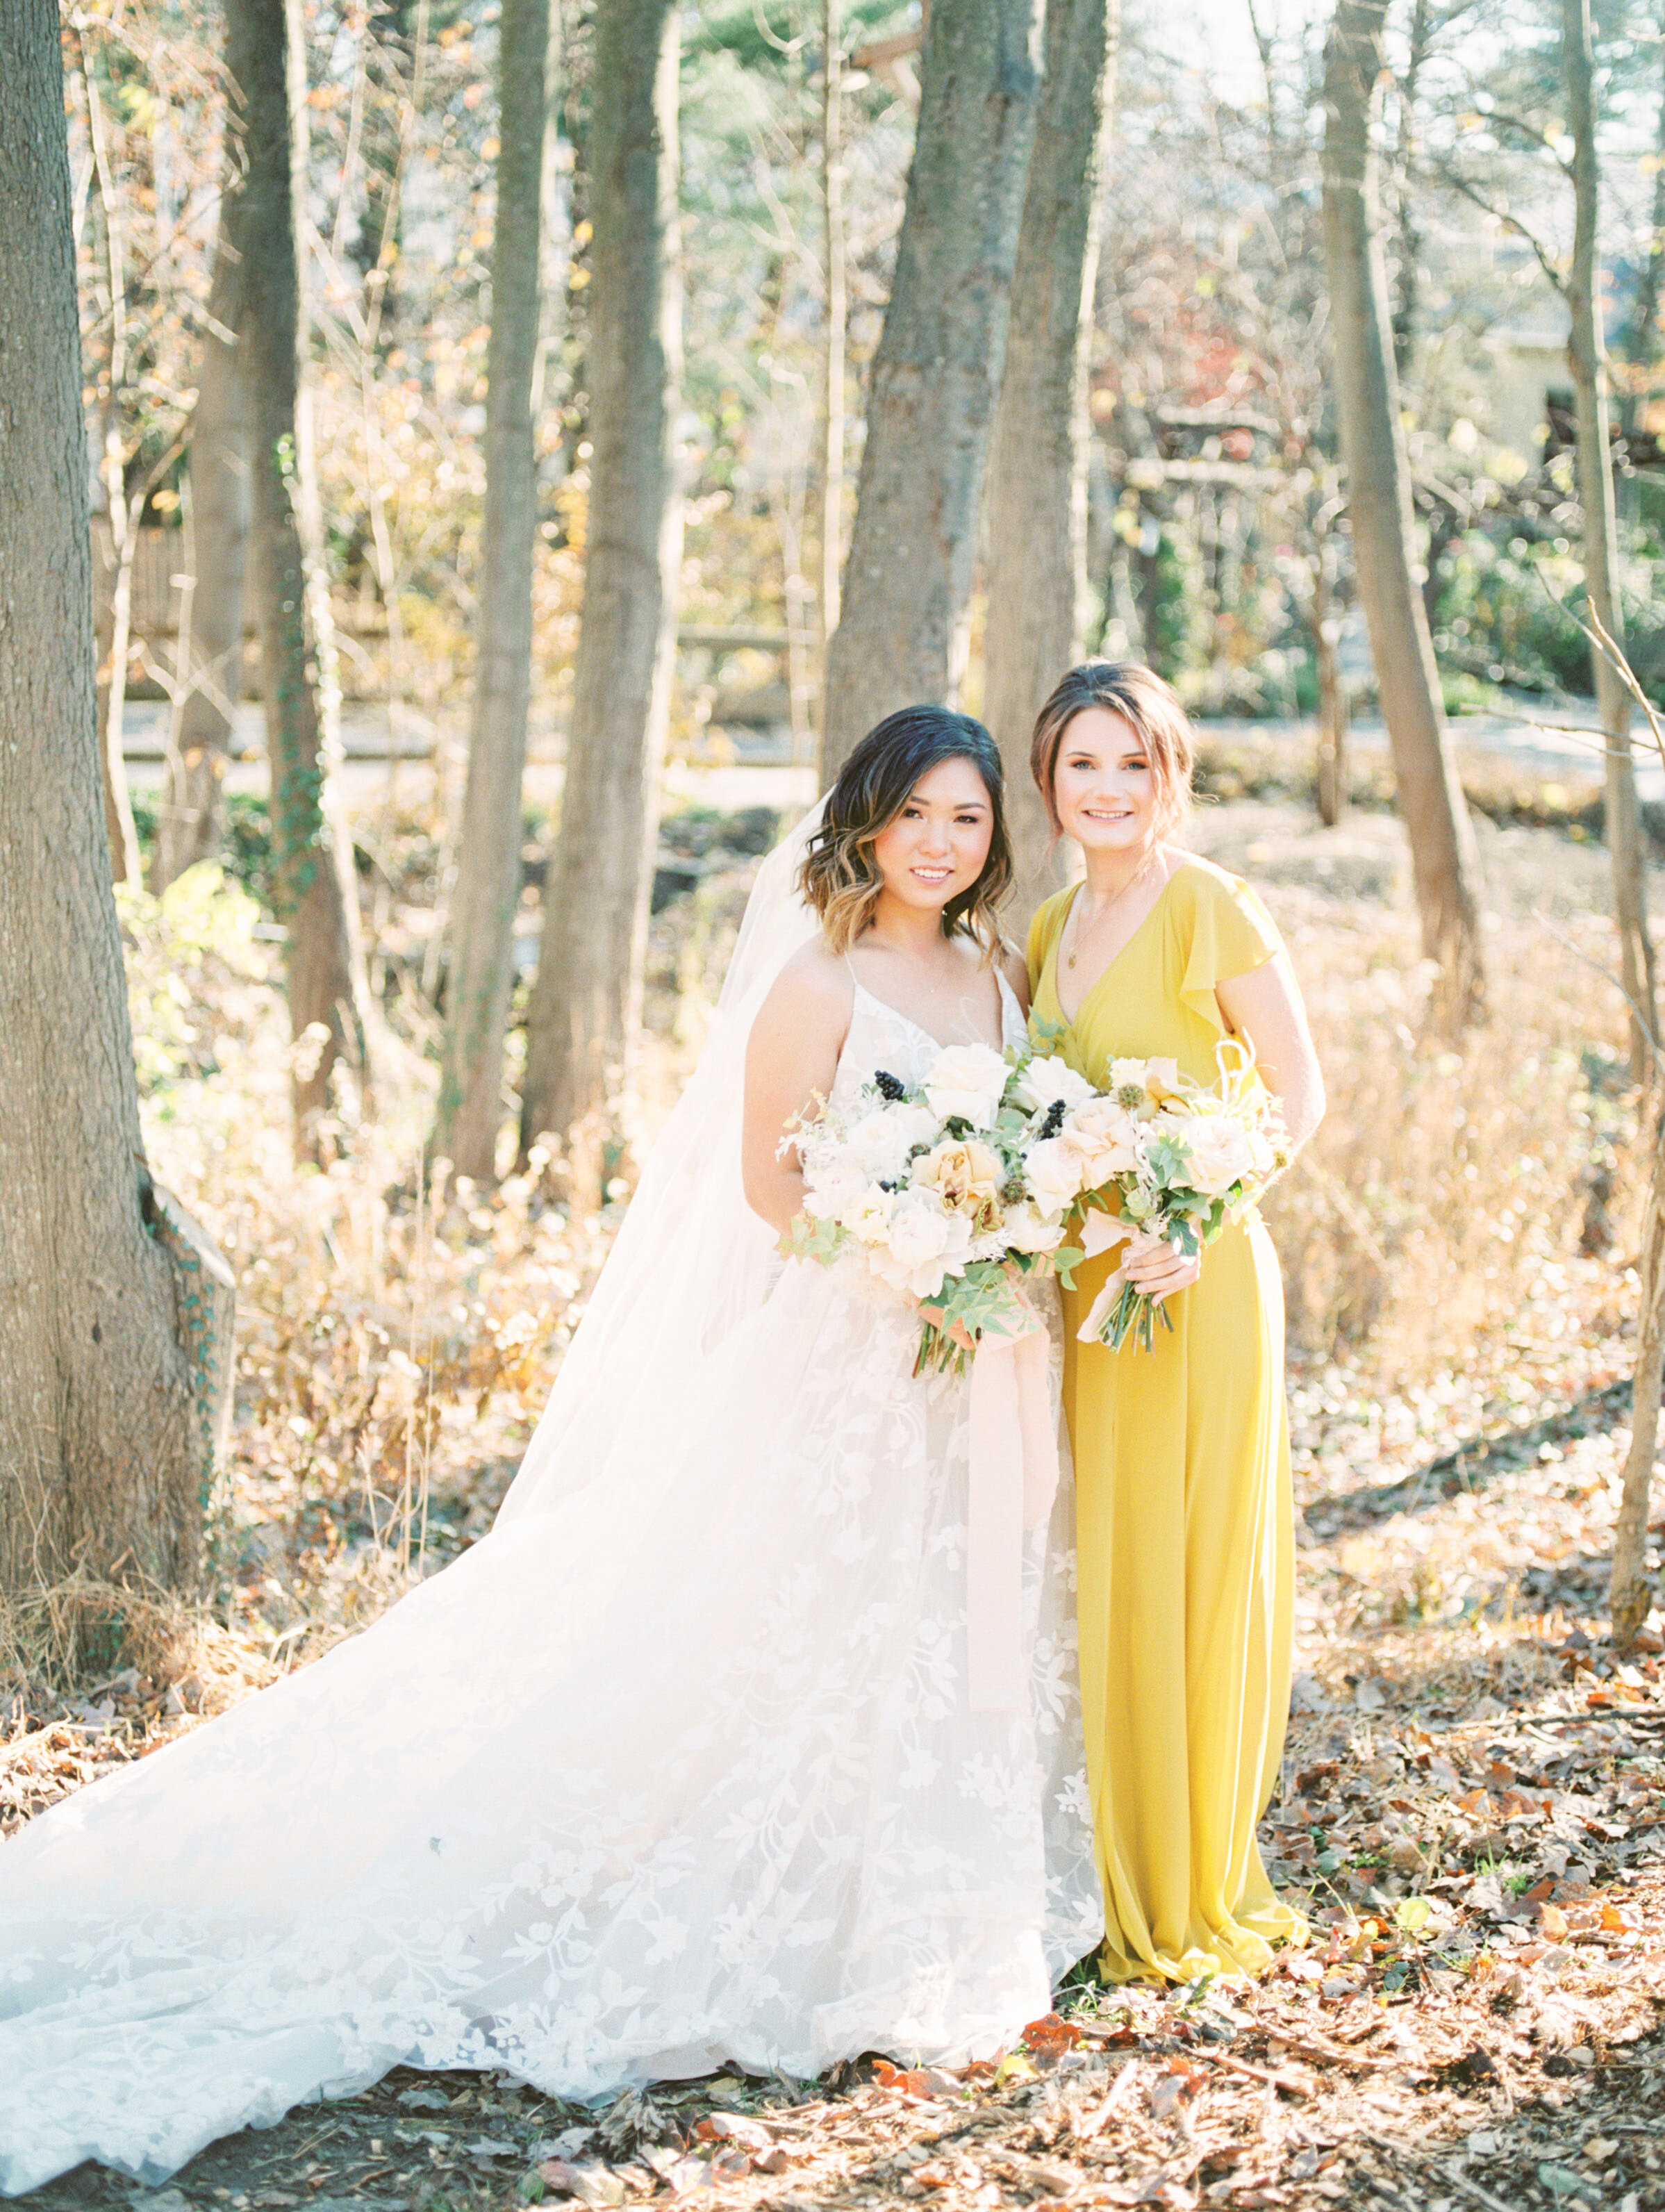 This late autumn wedding inspiration took place at the lovely Philadelphia Wedding Venue, Pomme Rador. Featuring the fine art style of Haley Richter photography and a romantic color palette.